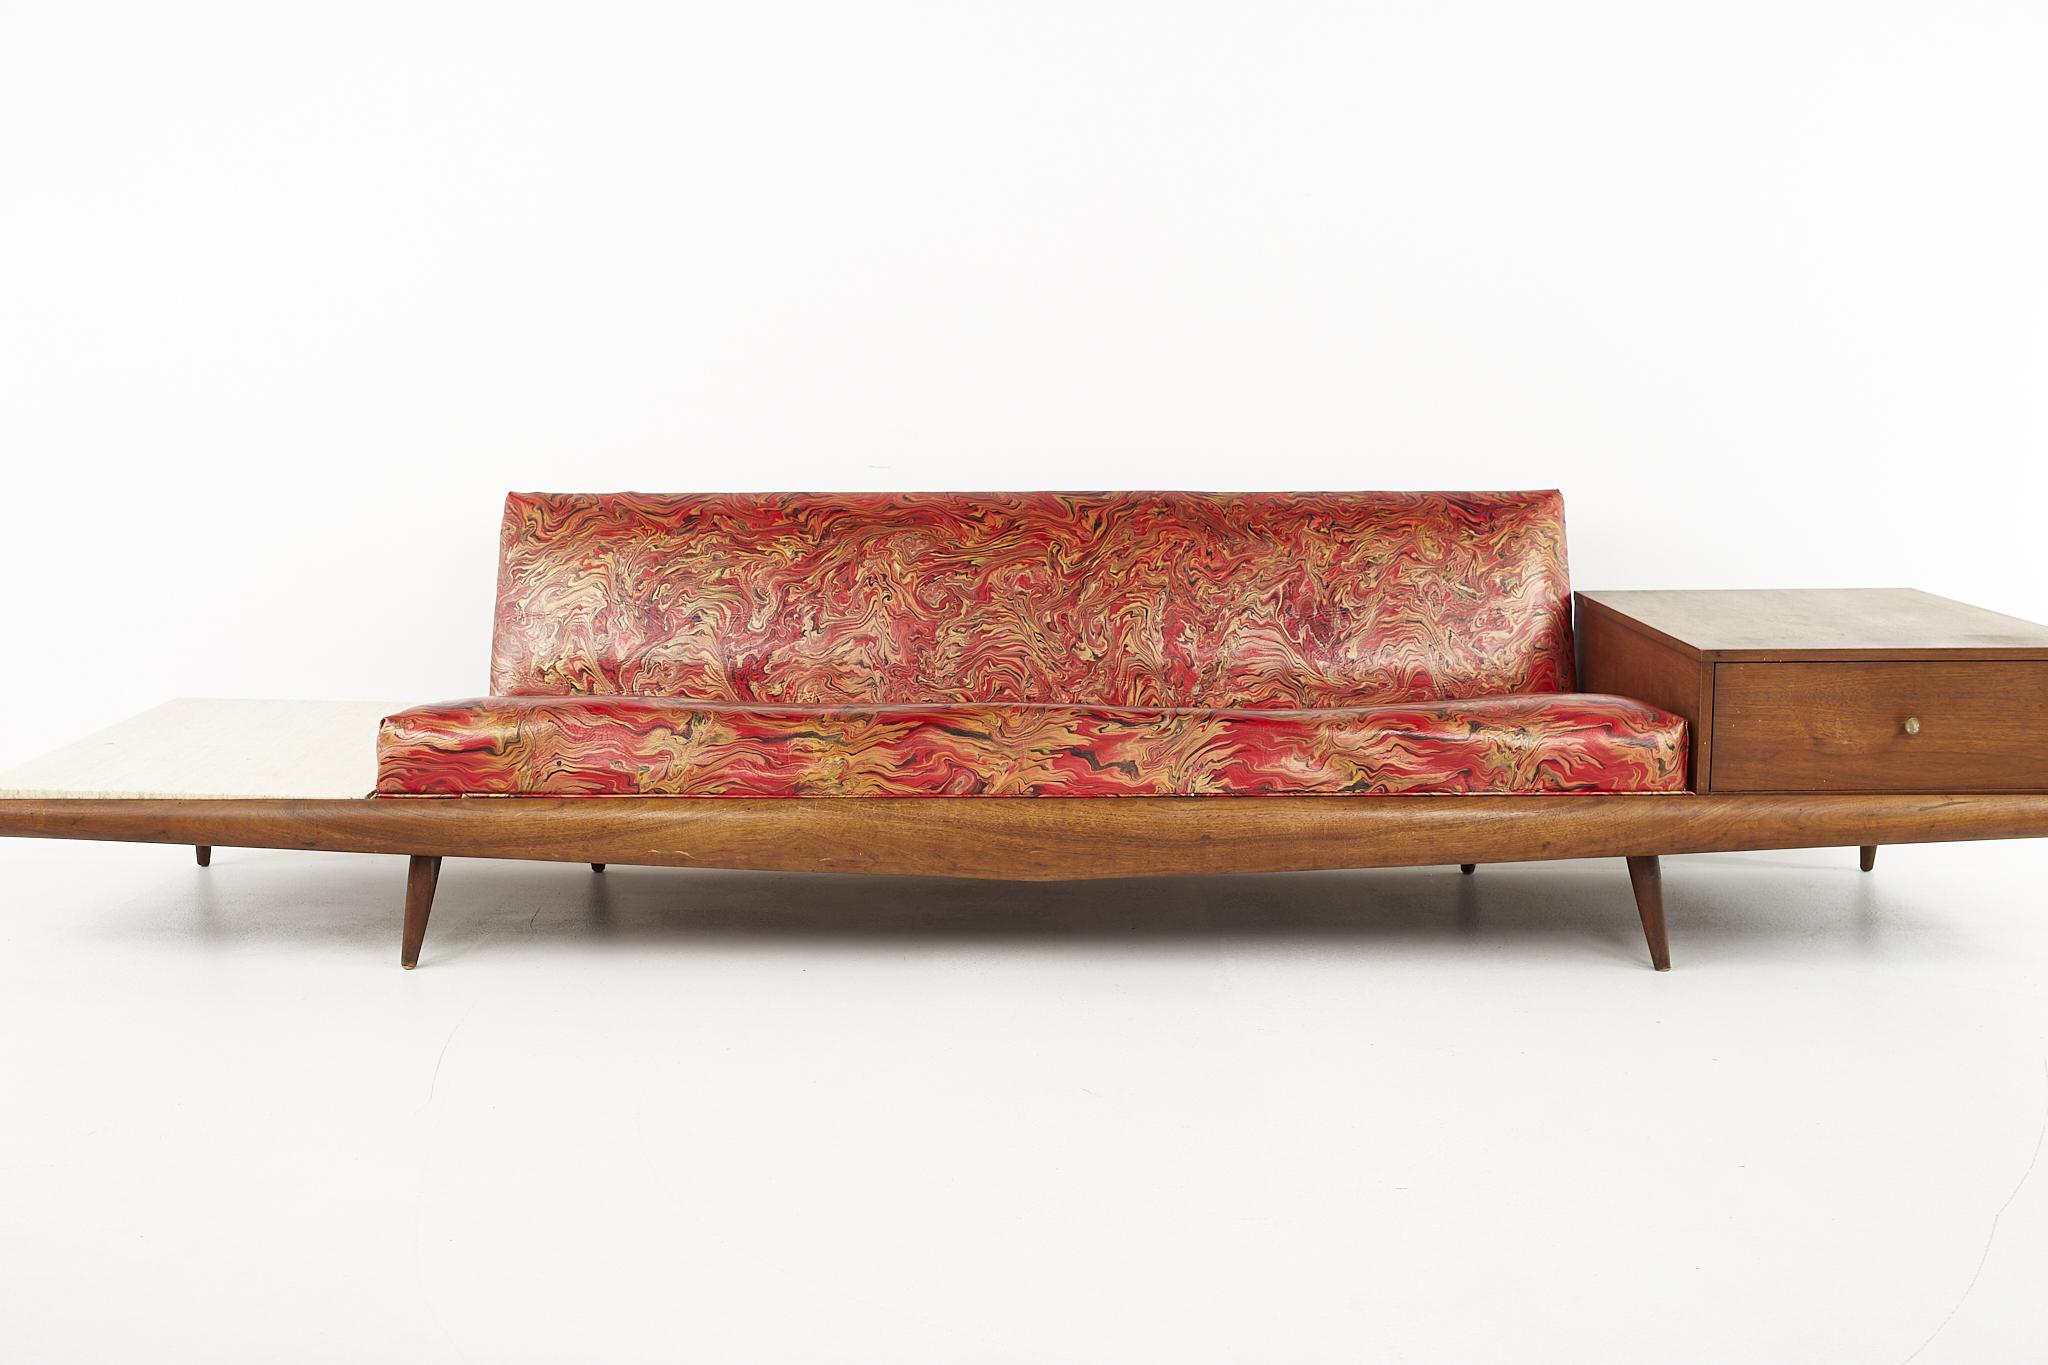 Adrian Pearsall mid century travertine and walnut platform sofa

The sofa measures: 125 wide x 30 deep x 27 high, with a seat height of 15 inches

All pieces of furniture can be had in what we call restored vintage condition. That means the